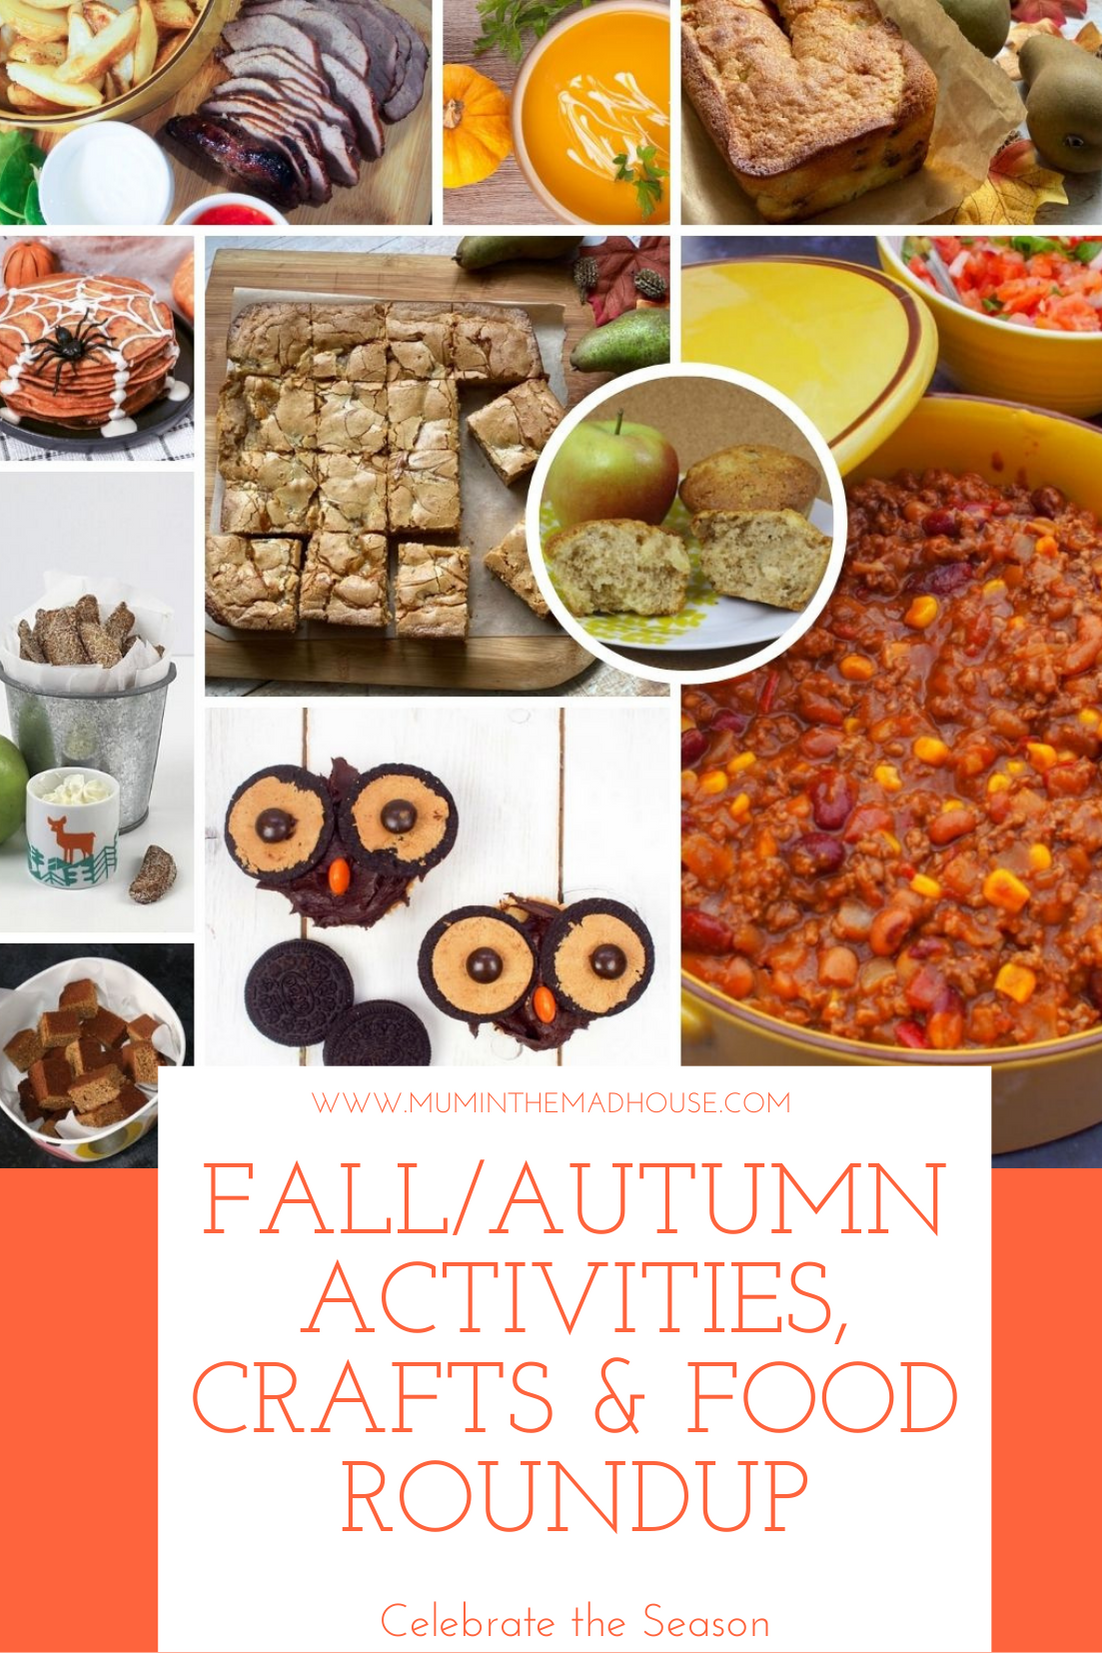 Celebrate the season with our Fall/Autumn Activities, Crafts and Food Roundup. Jump into Autumn with over 75 simple ideas for families 